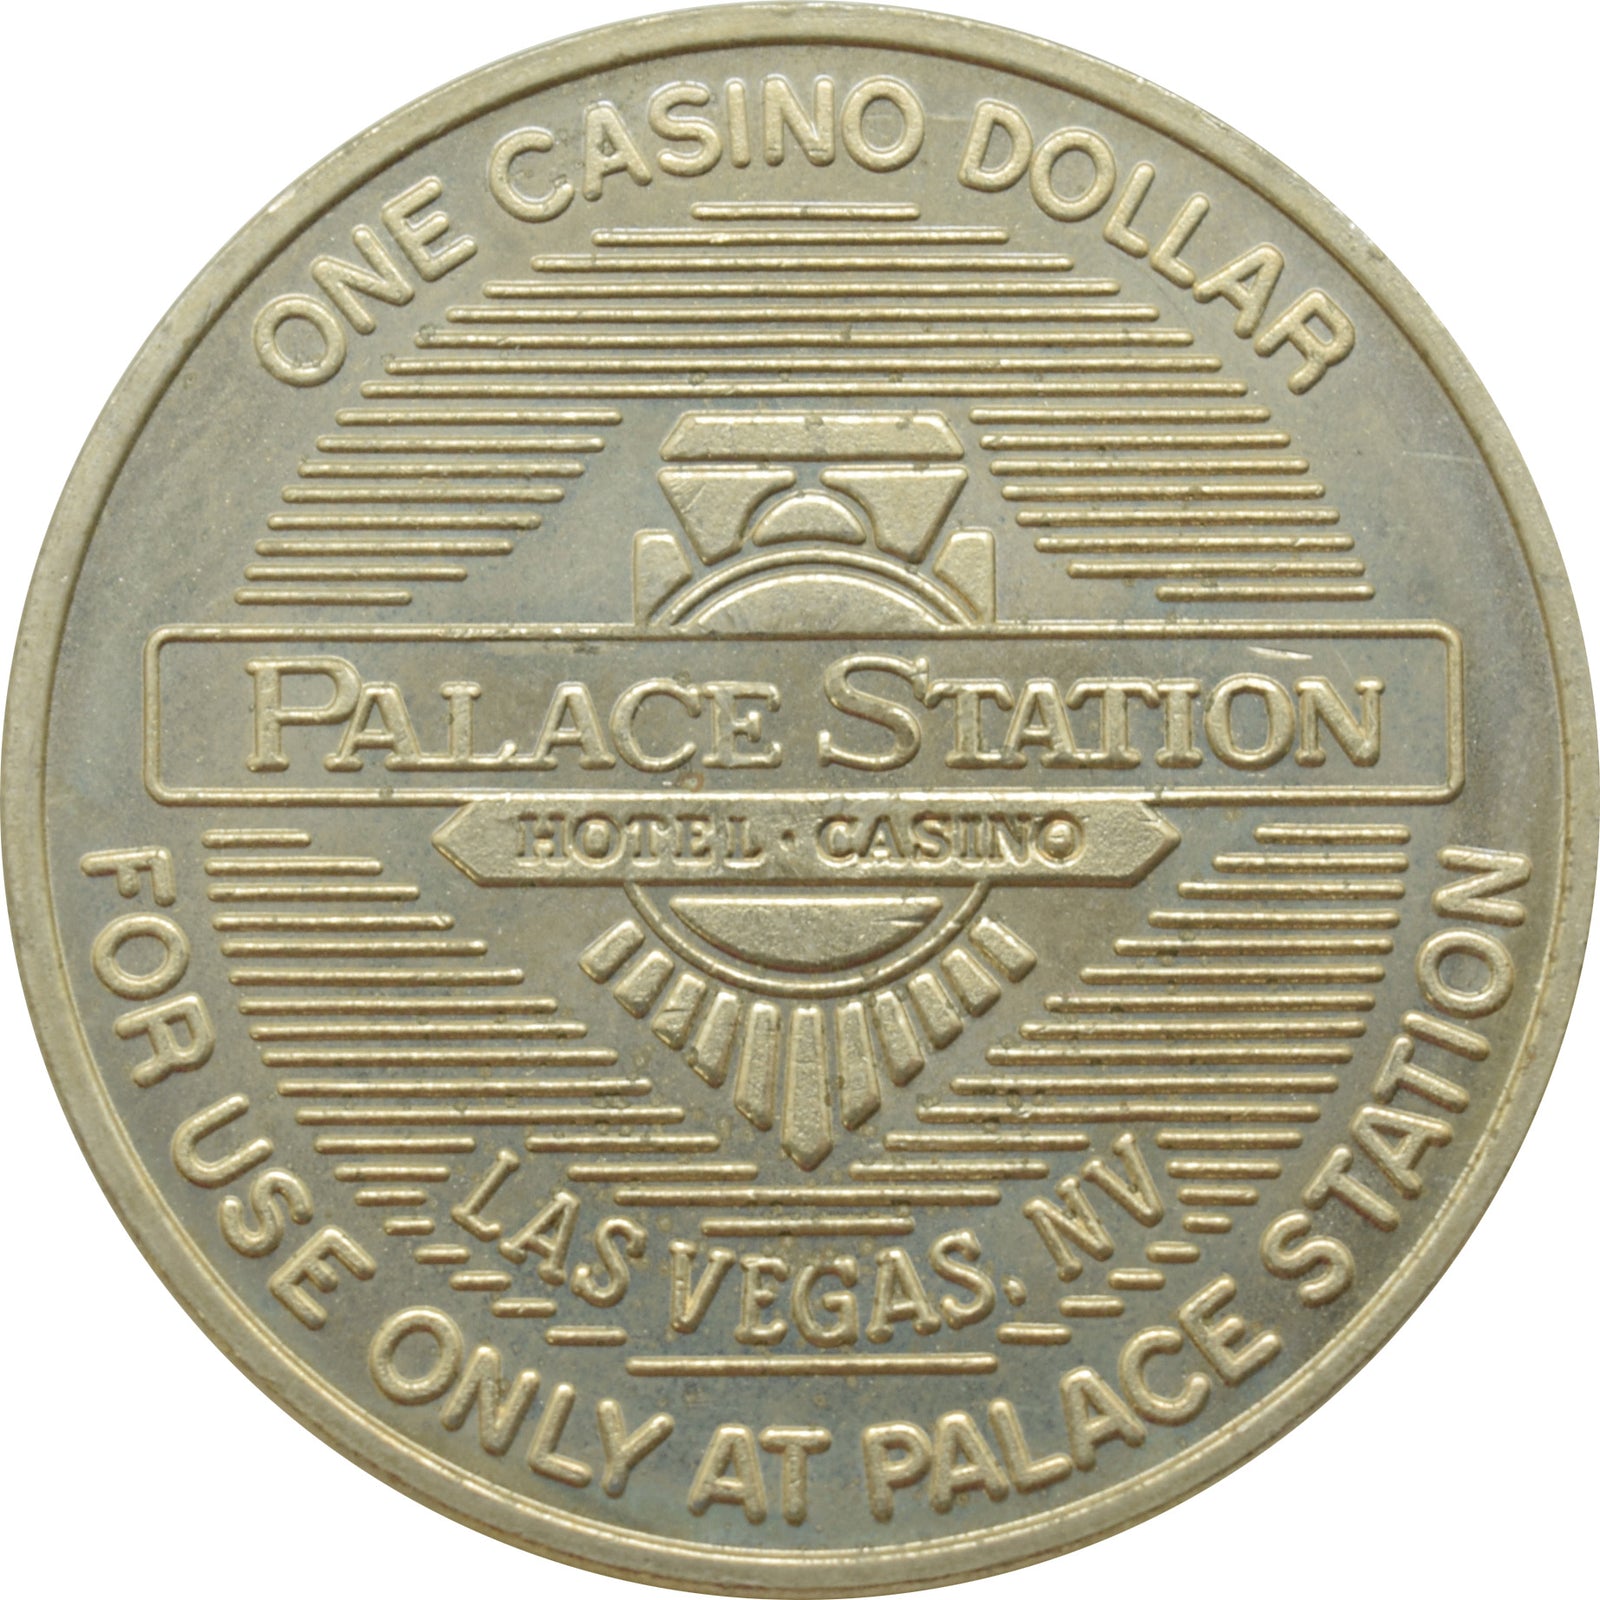 what year palace station casino grand opening